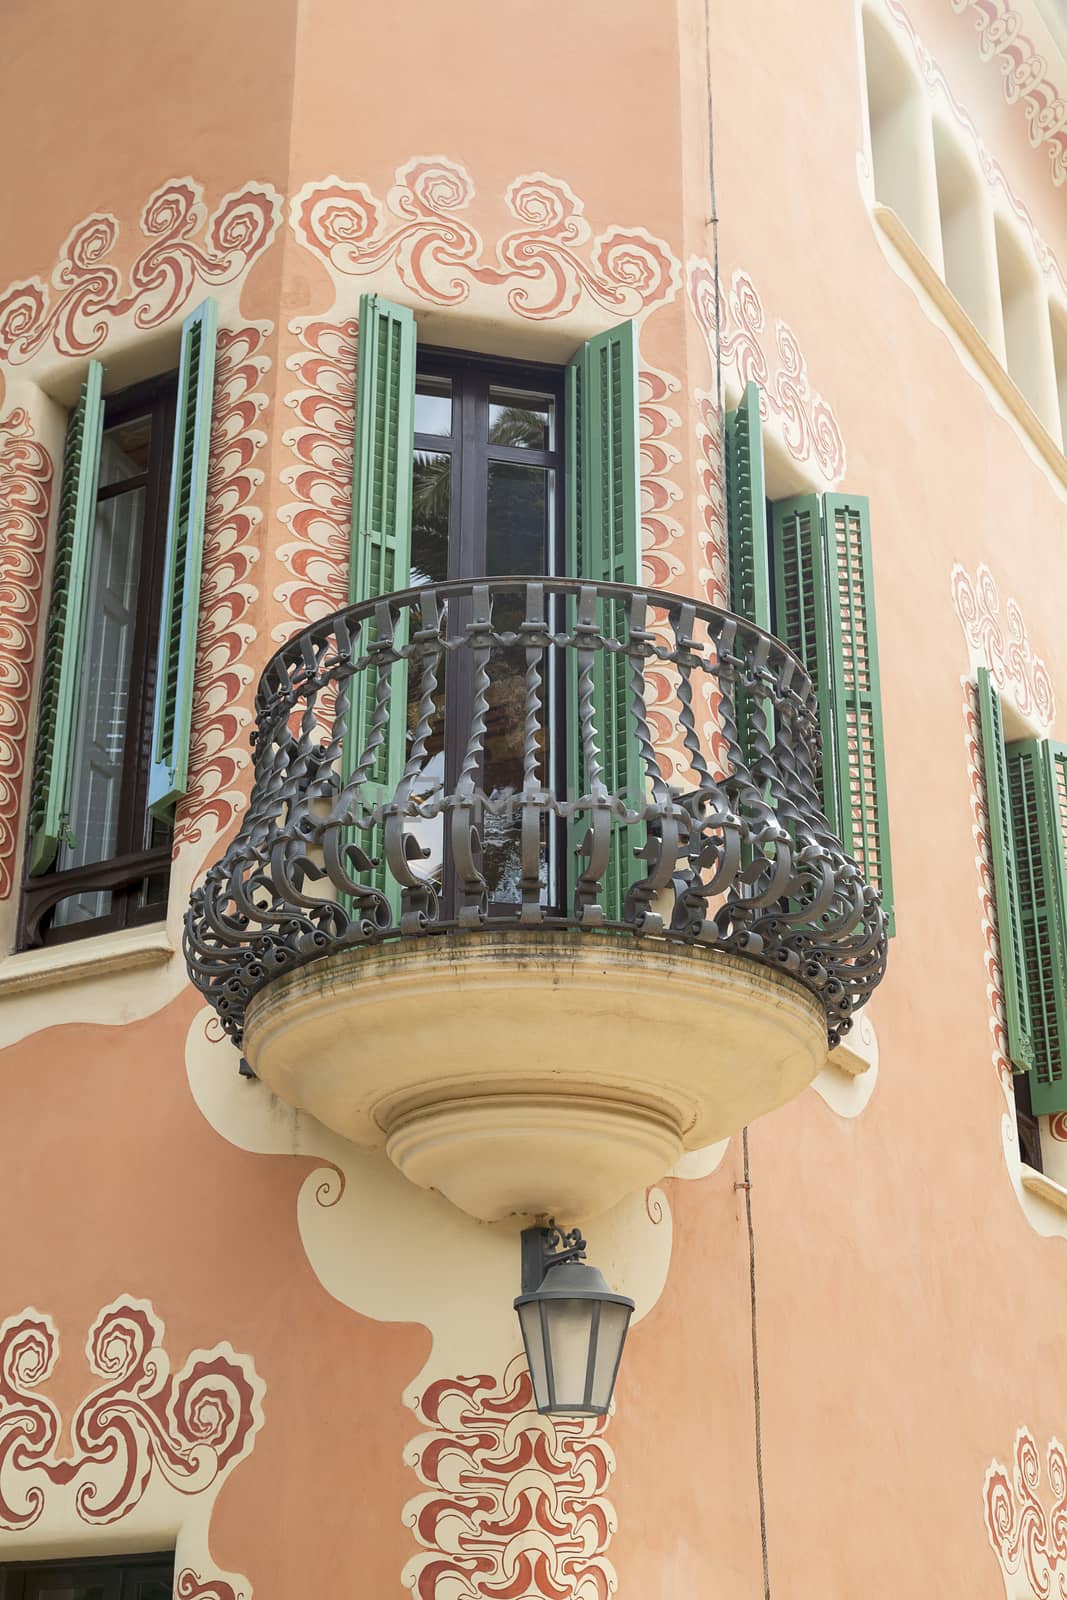 BARCELONA , SPAIN - MAY 13, 2016 : Facade with metal balcony on Gaudi House Museum. Building  located near the Park Guell  in Barcelona was the residence of Antoni Gaudi for almost 20 years, from 1906 to 1925.